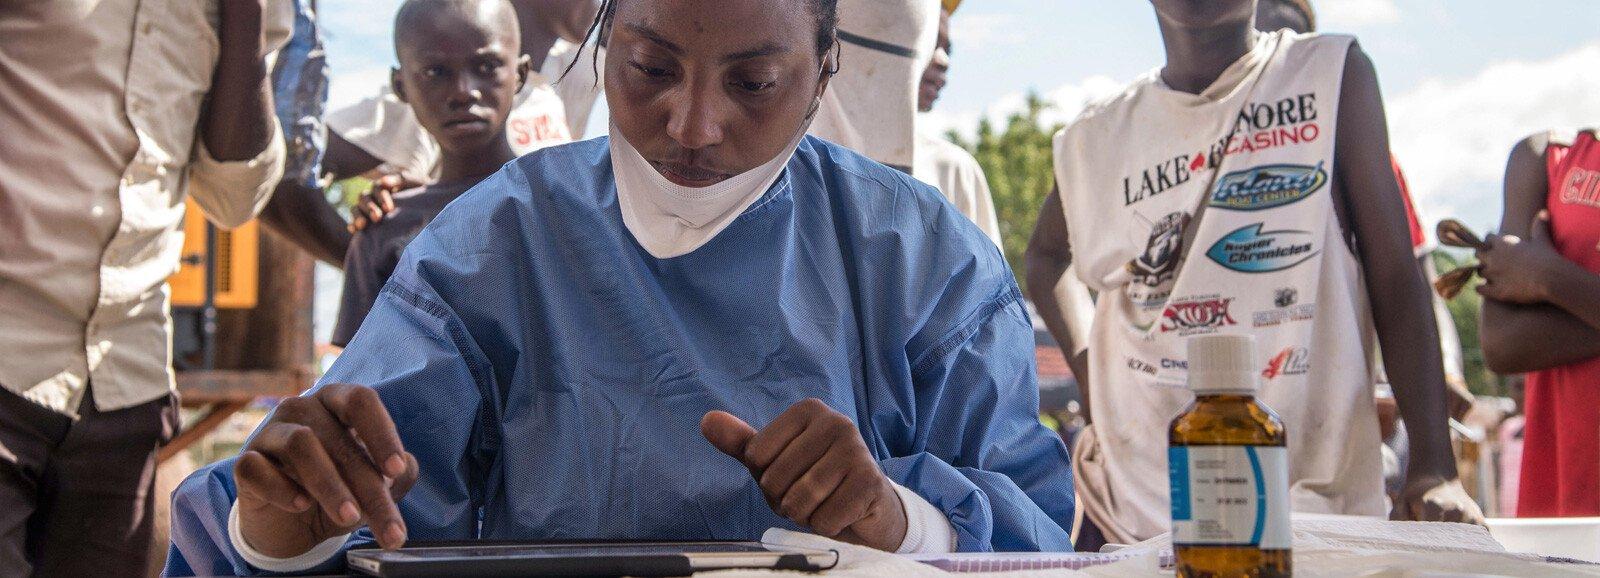 Nurses working with the World Health Organization prepare to administer vaccines in Mbandaka, the Democratic Republic of the Congo, during the launch of the 2018 Ebola vaccination campaign. 